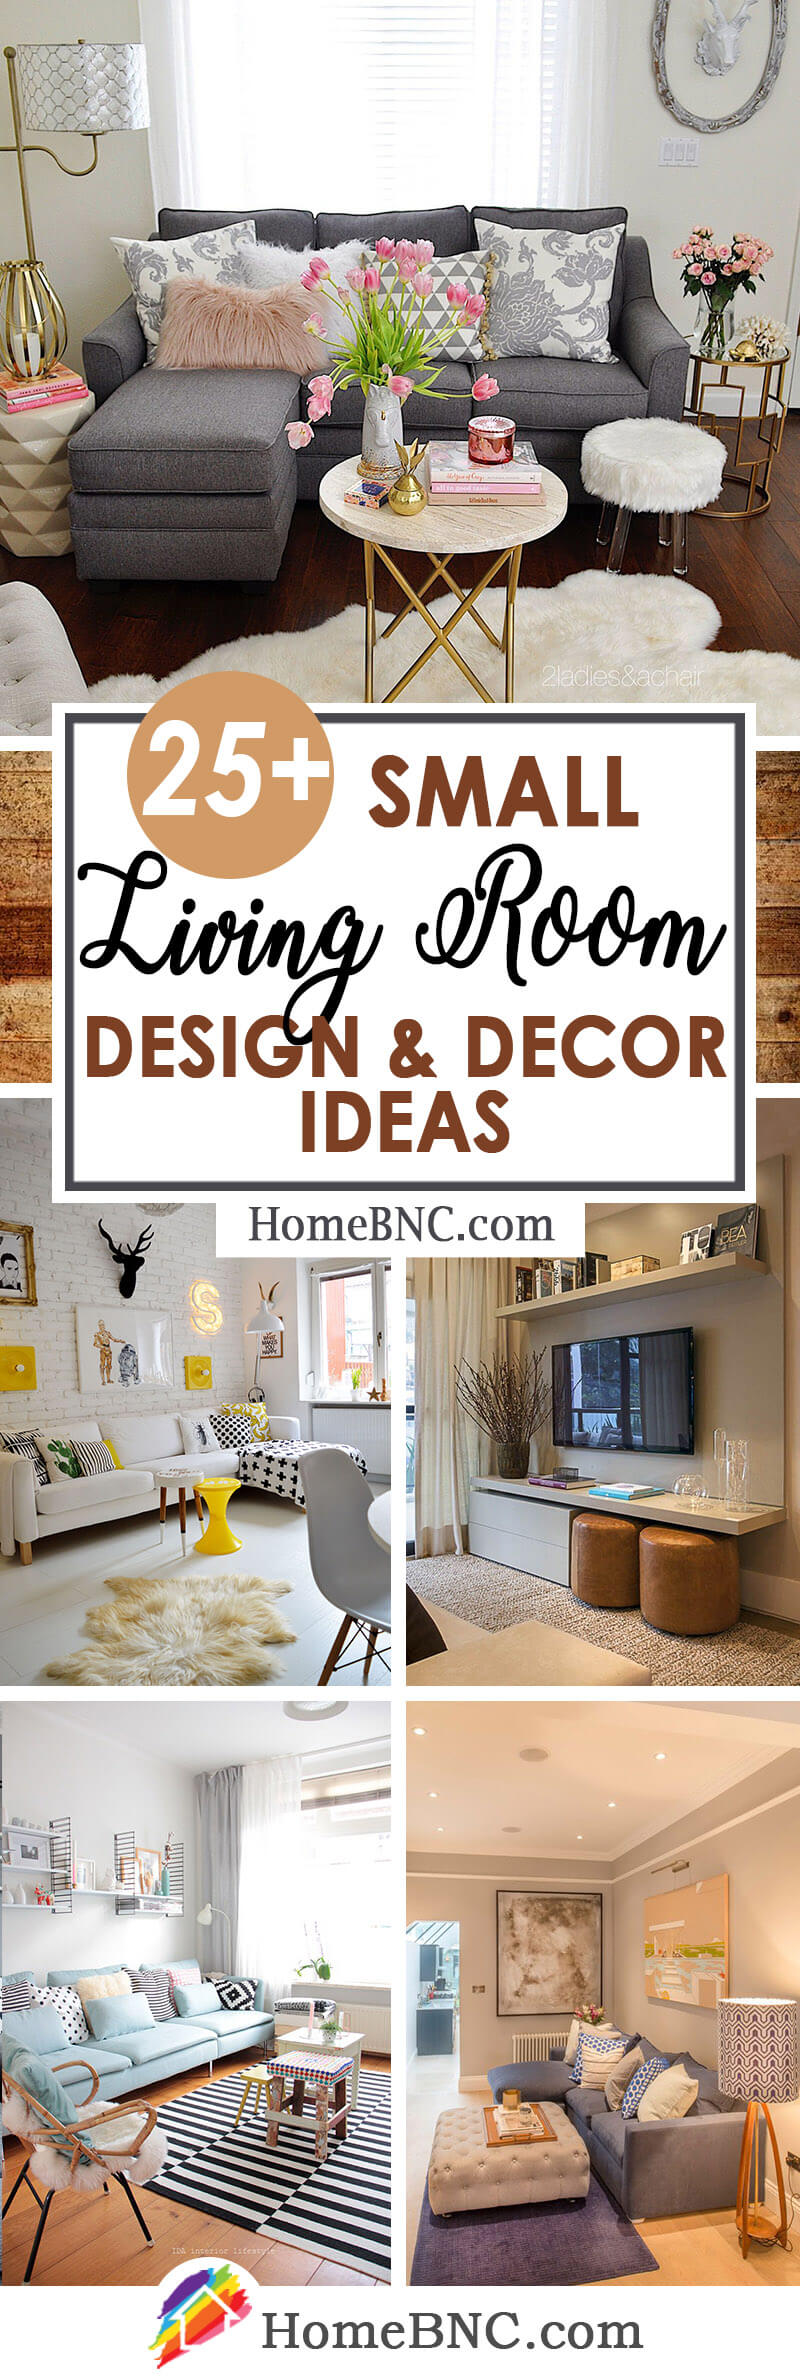 25 Best Small Living Room Decor And Design Ideas For 2021 - Interior Decor Ideas For Living Room